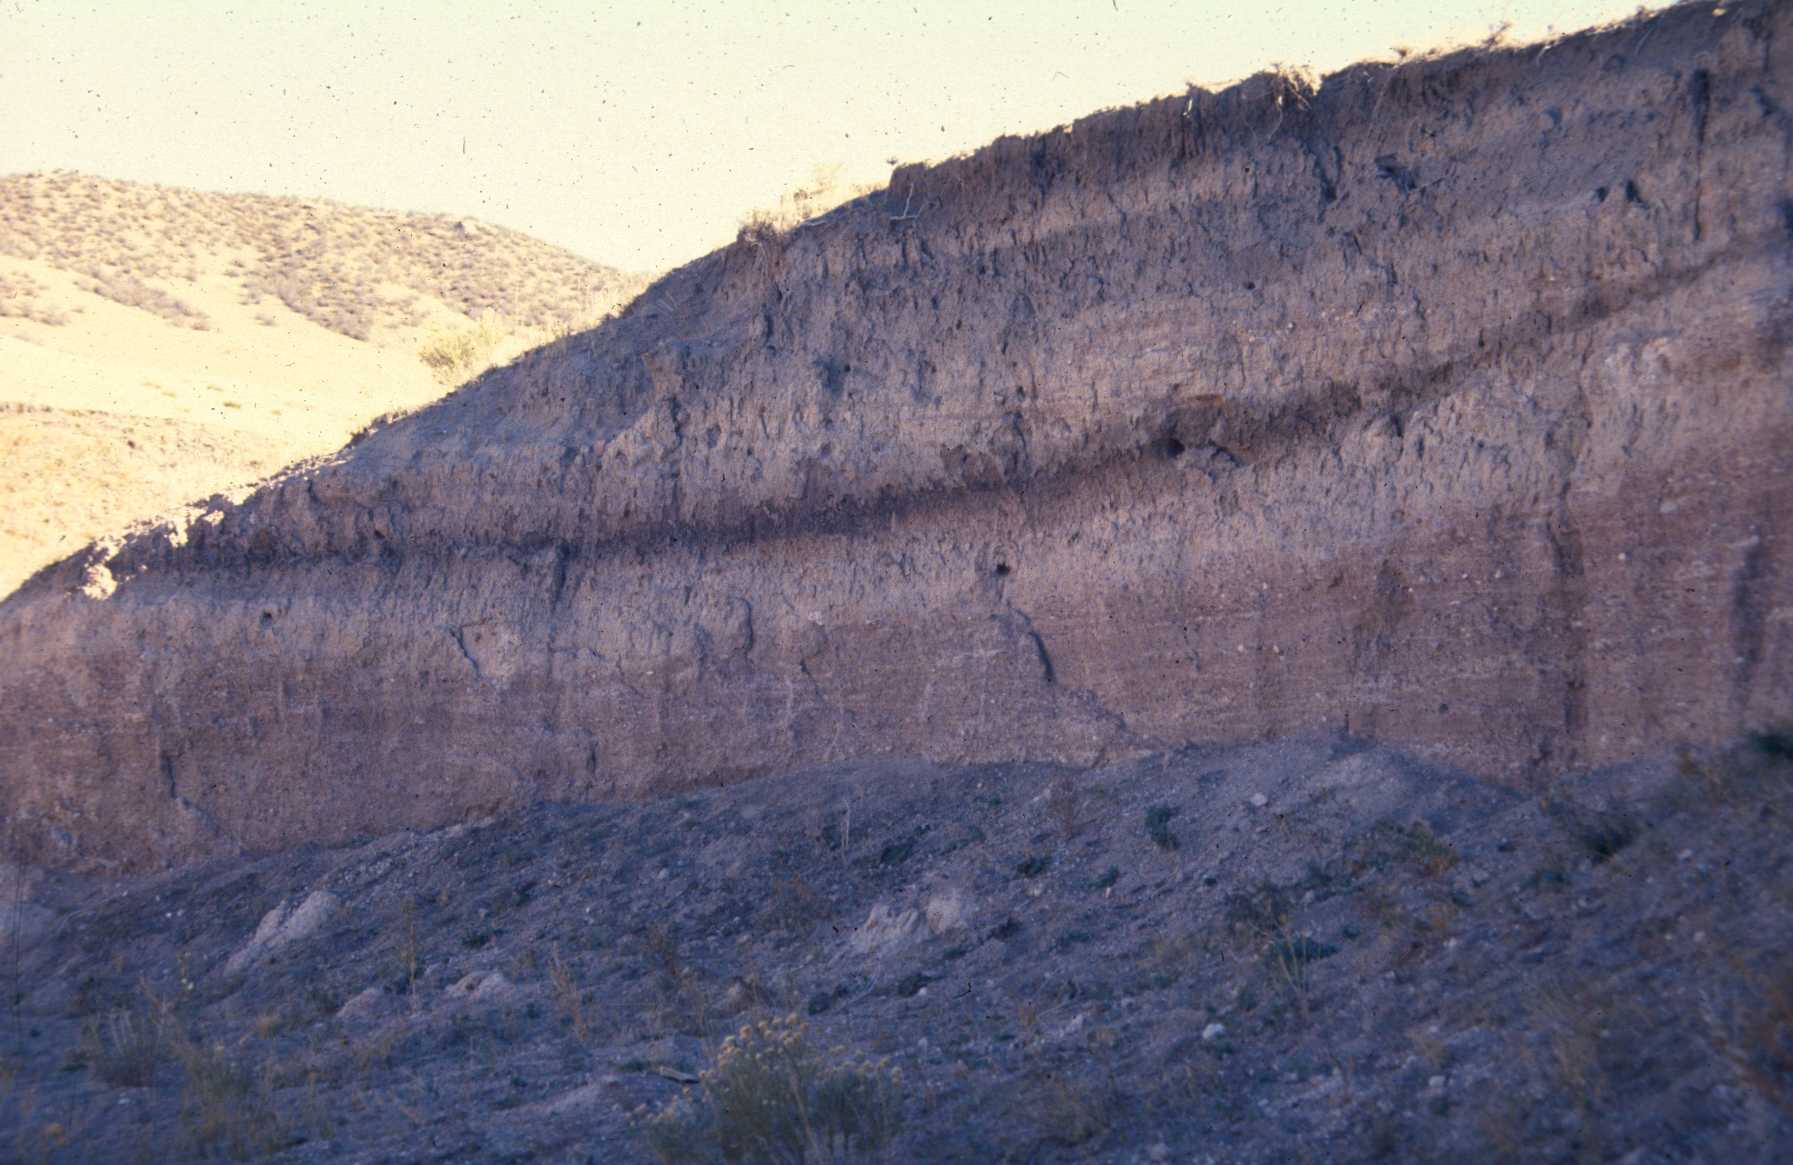 Photograph showing stratigraphic layers in a cut bank.